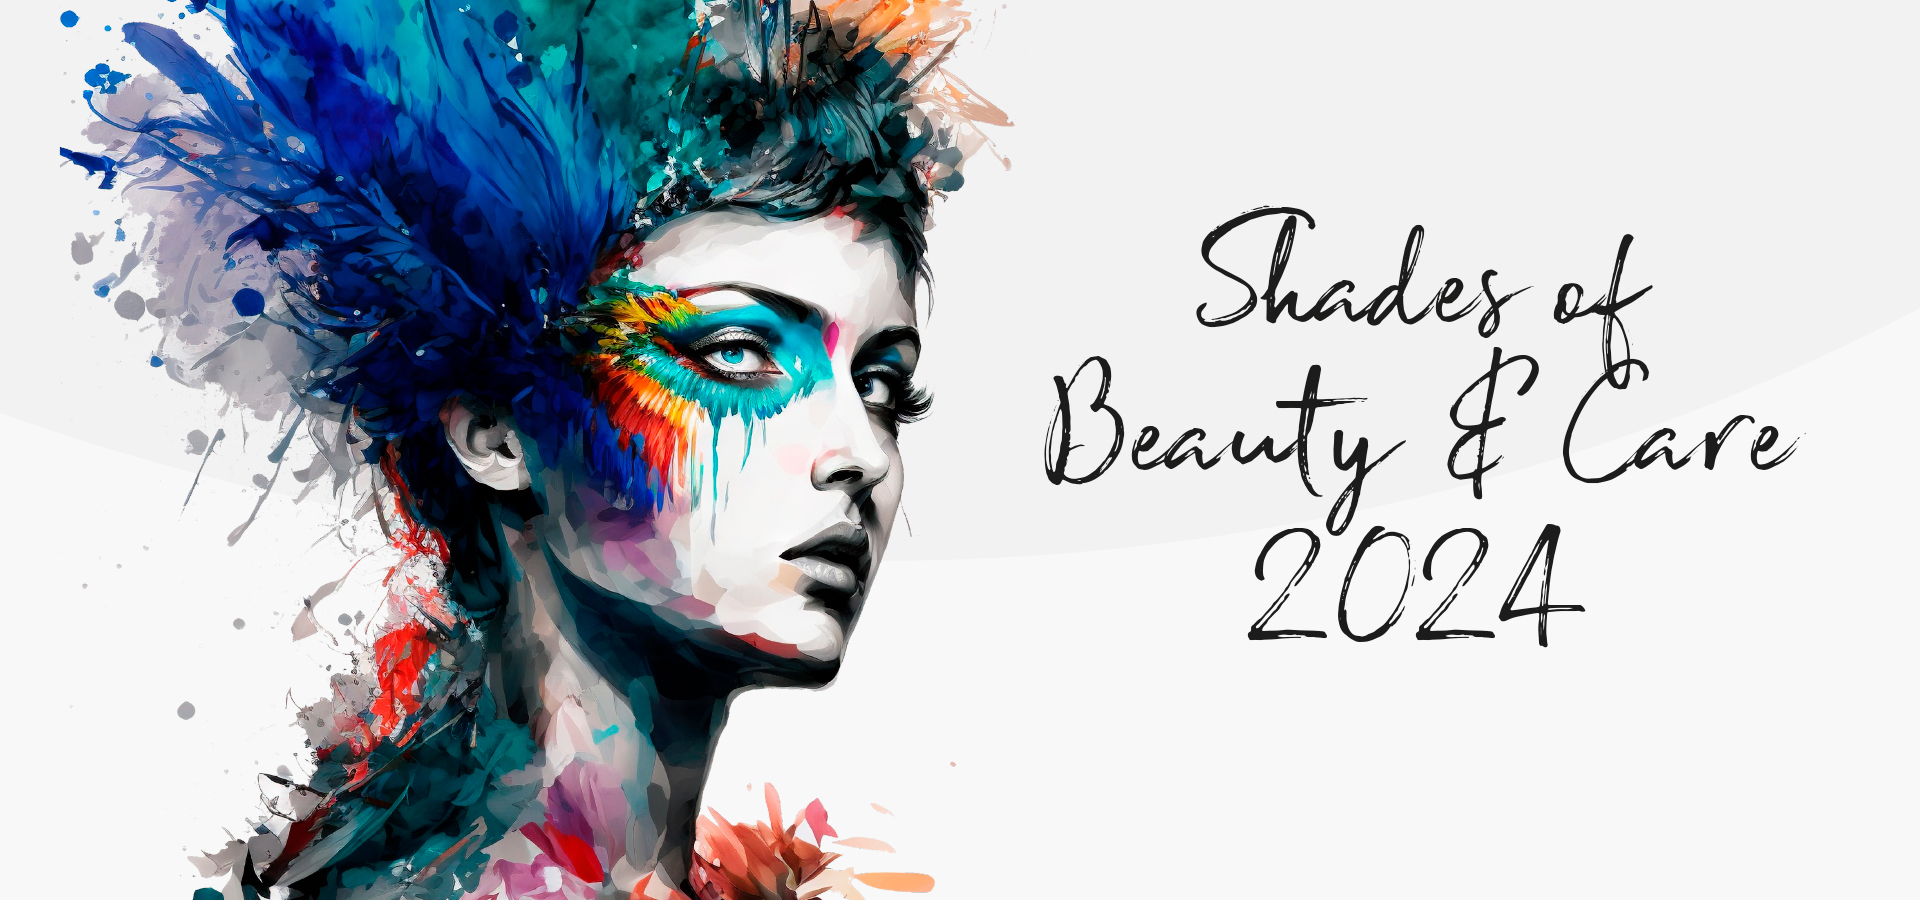 Shades of Beauty & Care 2024